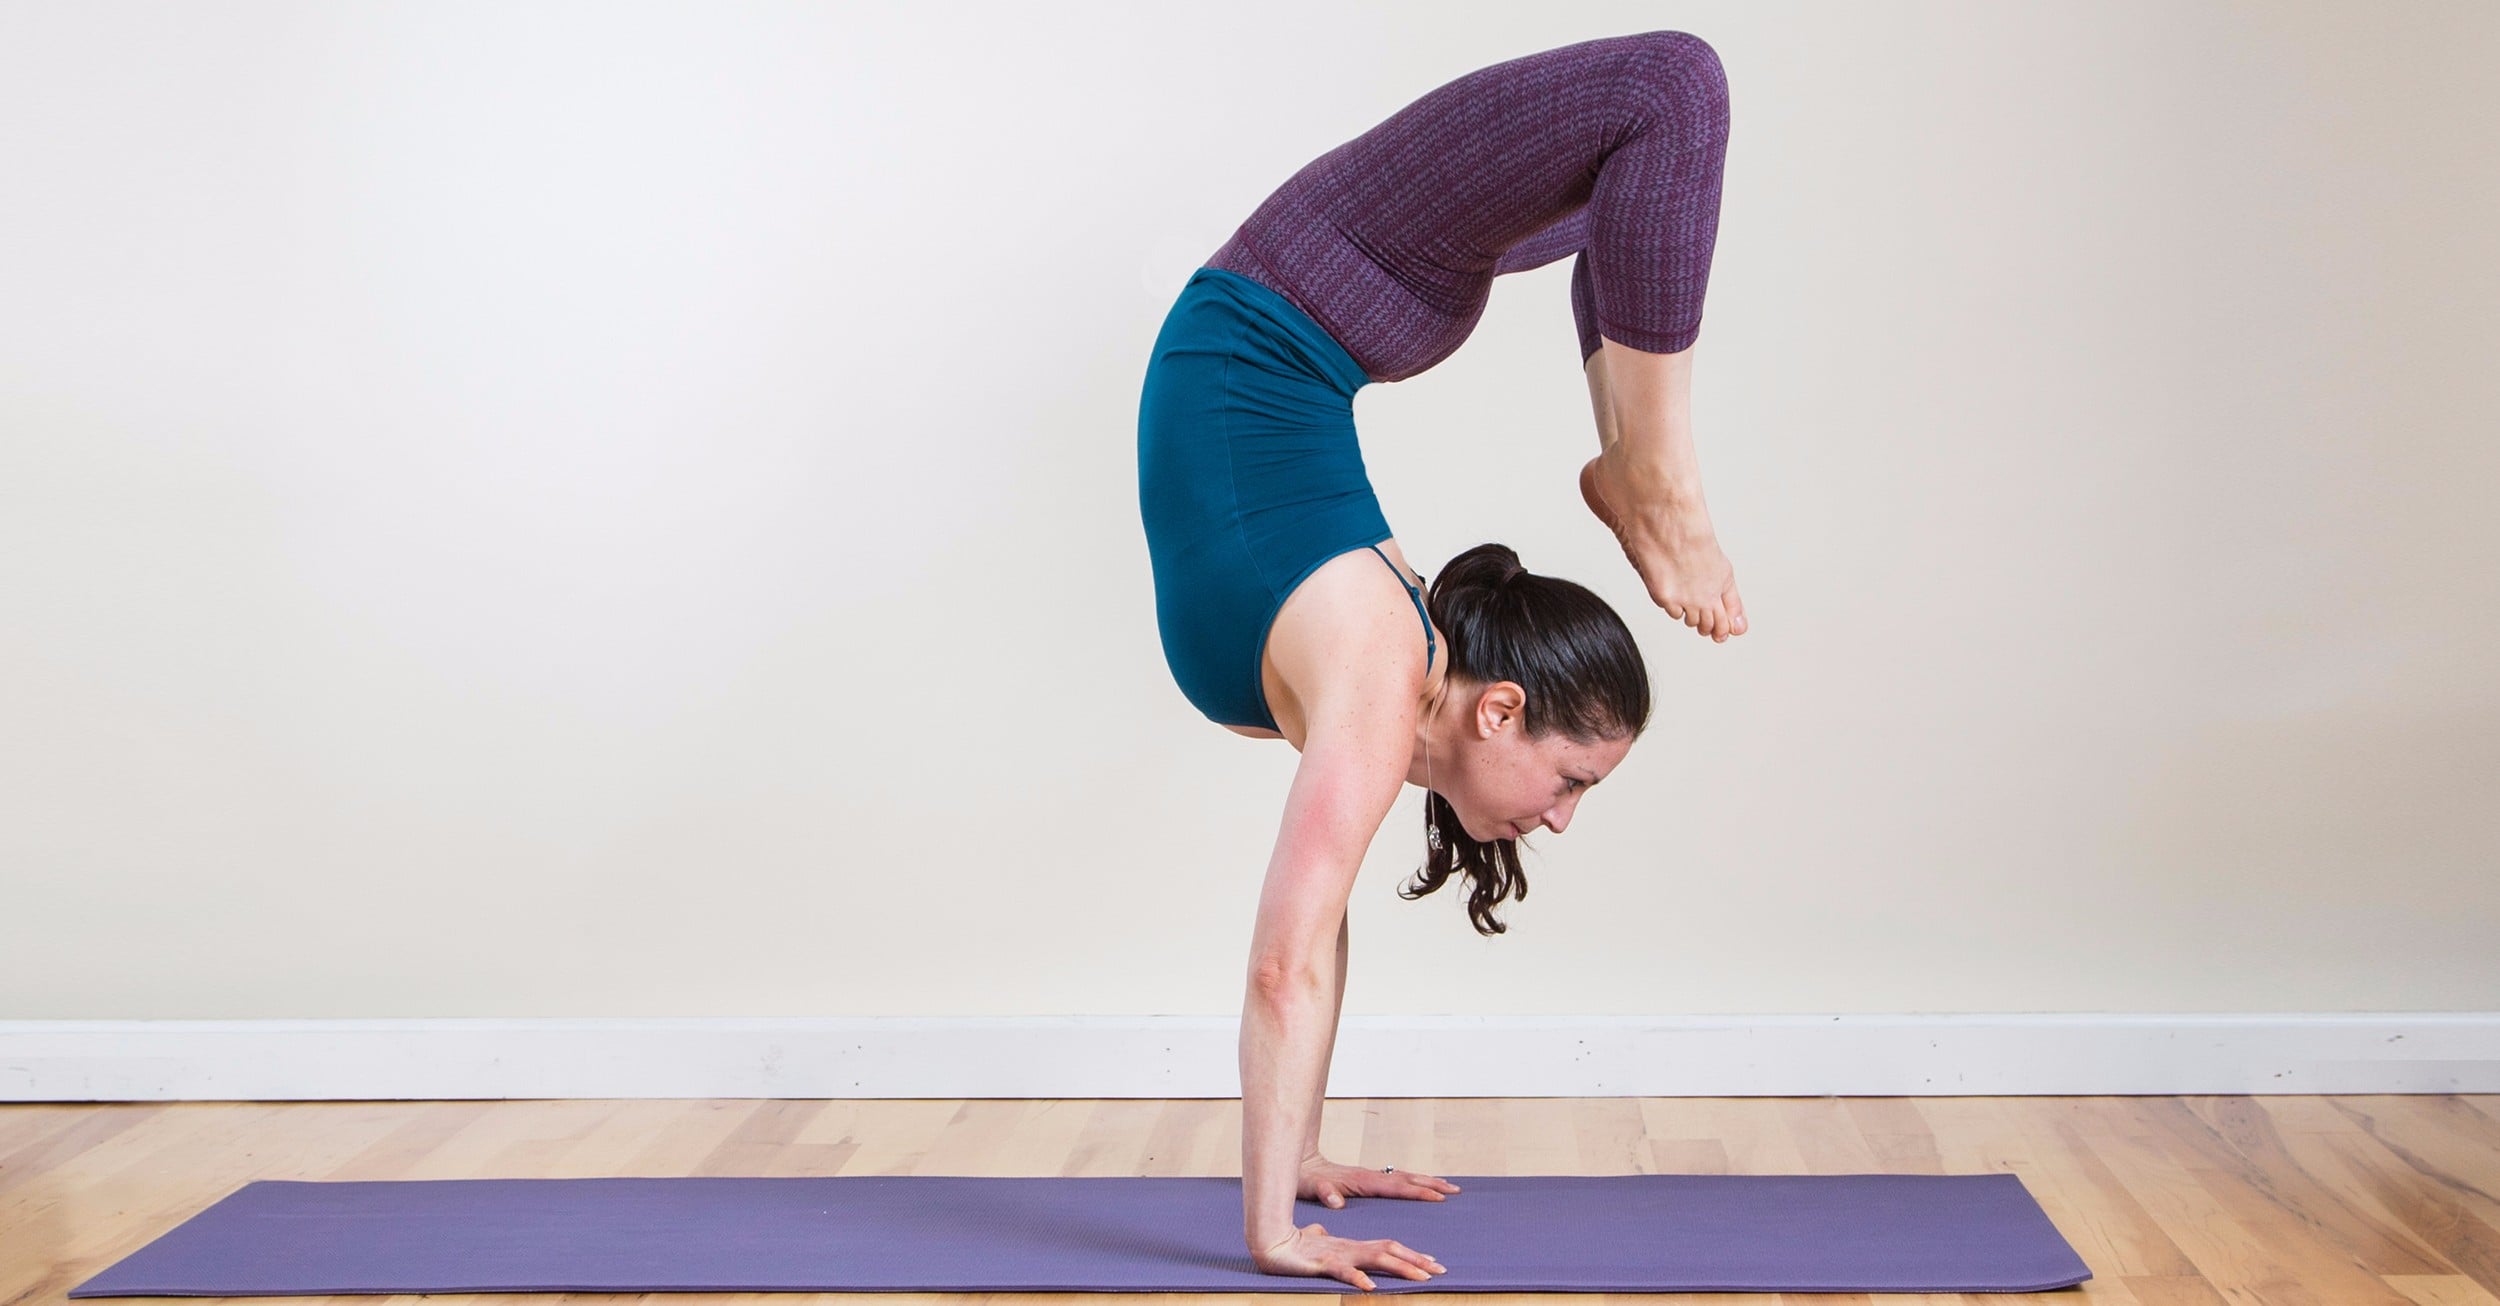 How to Do Handstand to Backbend in Yoga | POPSUGAR Fitness